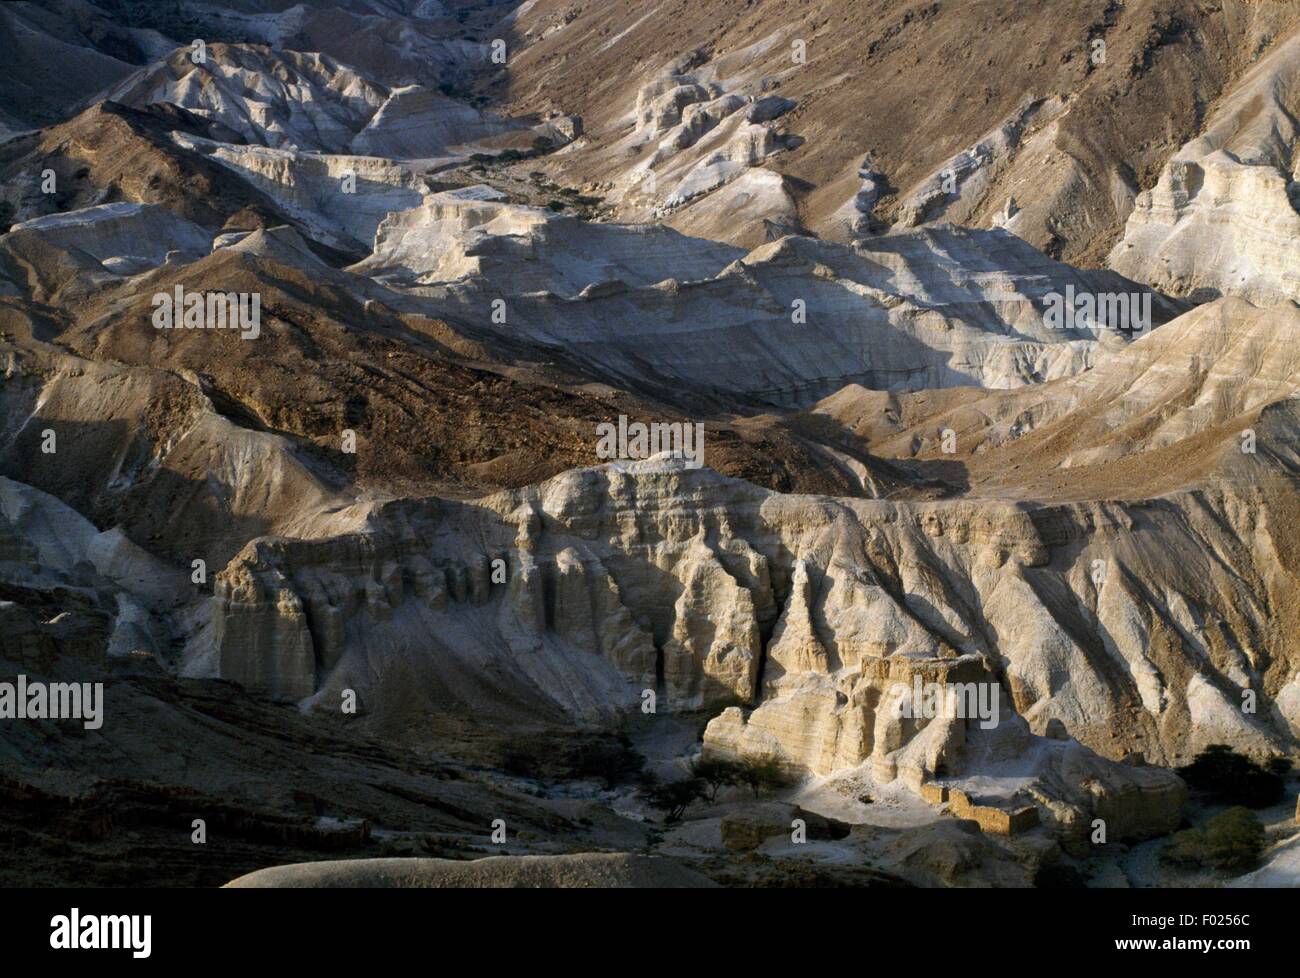 Effects of erosion on the fringes of the Negev Desert, between the Dead Sea and Arad, Israel. Stock Photo